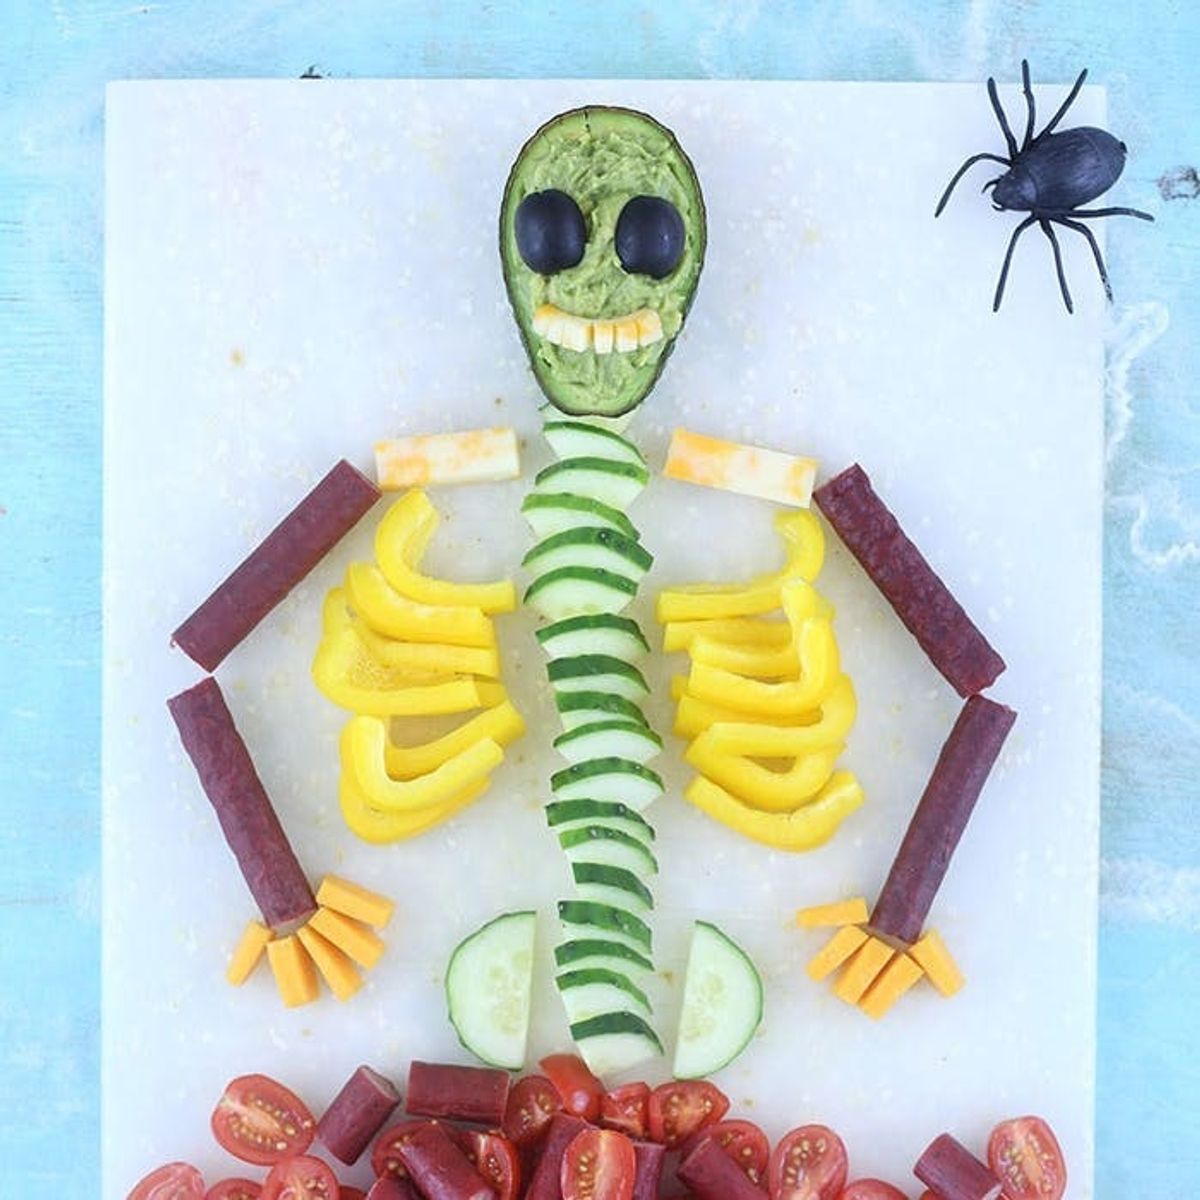 20 Healthy Halloween Snack Recipes for Eerily Good Eating